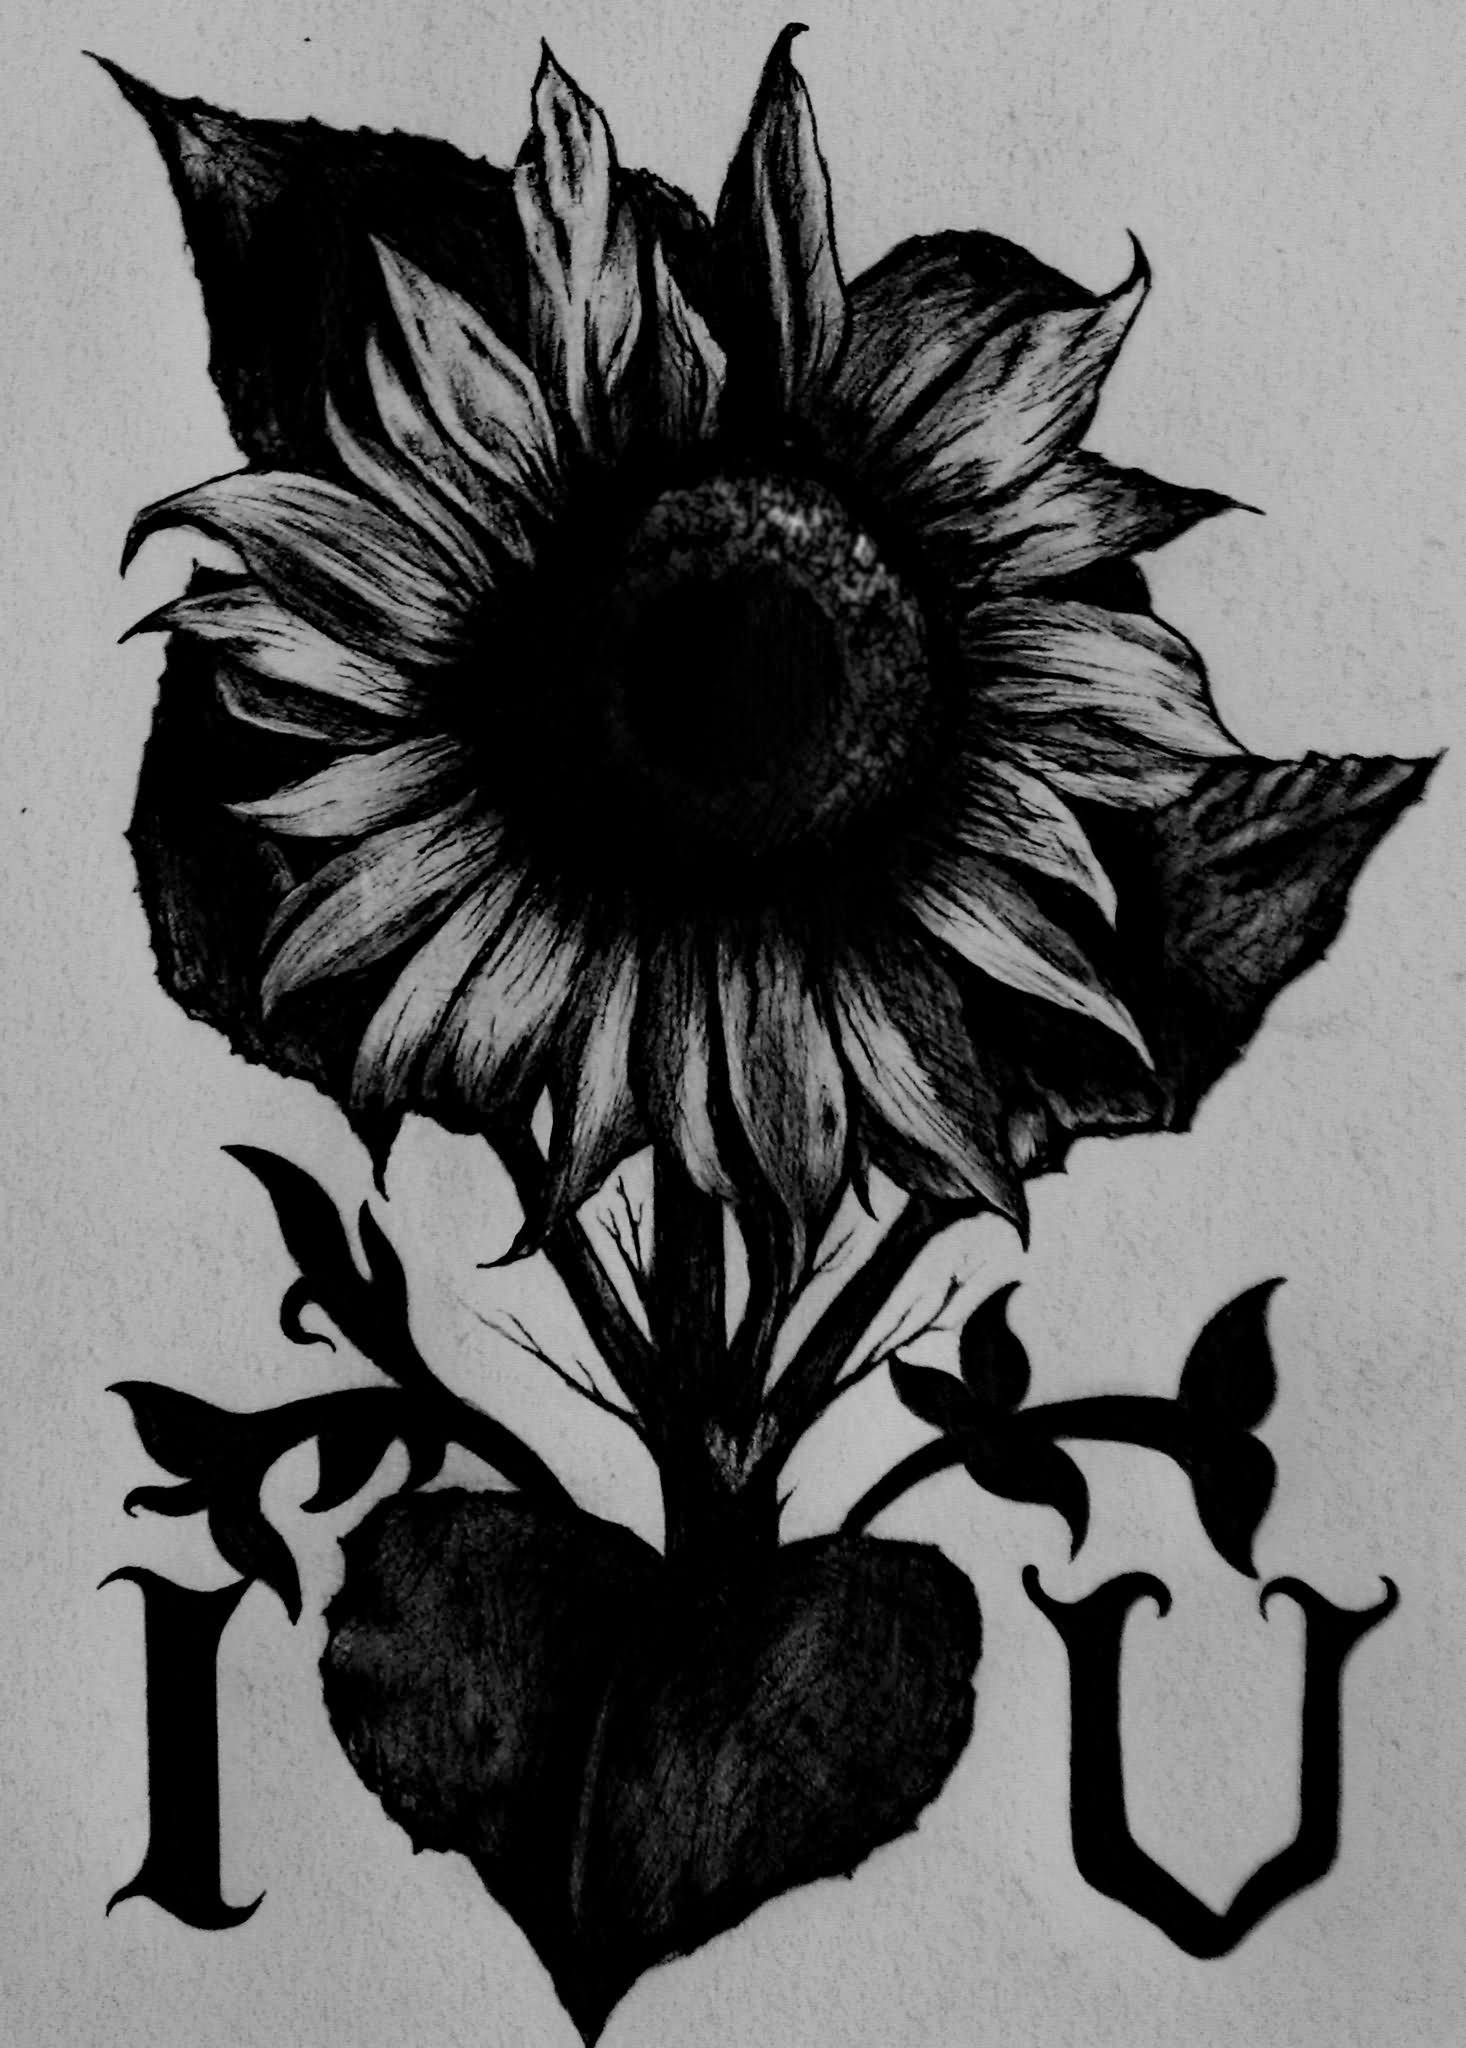 Black Sunflower With Leaves Tattoo Design By Jeremy Peralta